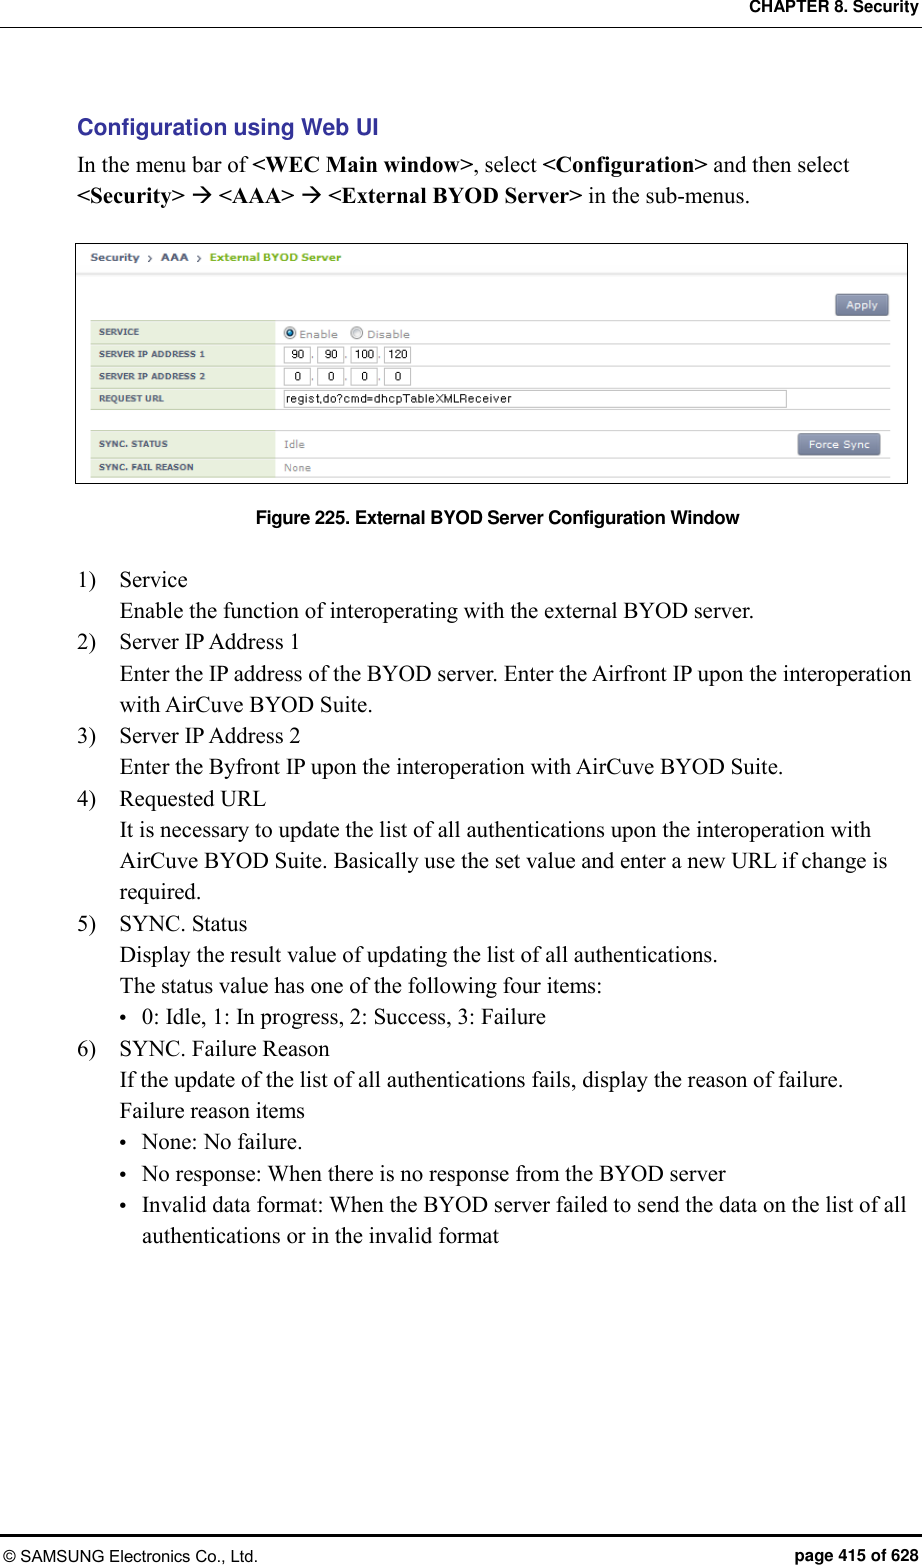 CHAPTER 8. Security © SAMSUNG Electronics Co., Ltd.  page 415 of 628 Configuration using Web UI In the menu bar of &lt;WEC Main window&gt;, select &lt;Configuration&gt; and then select &lt;Security&gt;  &lt;AAA&gt;  &lt;External BYOD Server&gt; in the sub-menus.  Figure 225. External BYOD Server Configuration Window  1)    Service Enable the function of interoperating with the external BYOD server. 2)    Server IP Address 1 Enter the IP address of the BYOD server. Enter the Airfront IP upon the interoperation with AirCuve BYOD Suite. 3)    Server IP Address 2 Enter the Byfront IP upon the interoperation with AirCuve BYOD Suite. 4)    Requested URL It is necessary to update the list of all authentications upon the interoperation with AirCuve BYOD Suite. Basically use the set value and enter a new URL if change is required. 5)    SYNC. Status Display the result value of updating the list of all authentications. The status value has one of the following four items:  0: Idle, 1: In progress, 2: Success, 3: Failure 6)    SYNC. Failure Reason If the update of the list of all authentications fails, display the reason of failure. Failure reason items  None: No failure.  No response: When there is no response from the BYOD server  Invalid data format: When the BYOD server failed to send the data on the list of all authentications or in the invalid format  